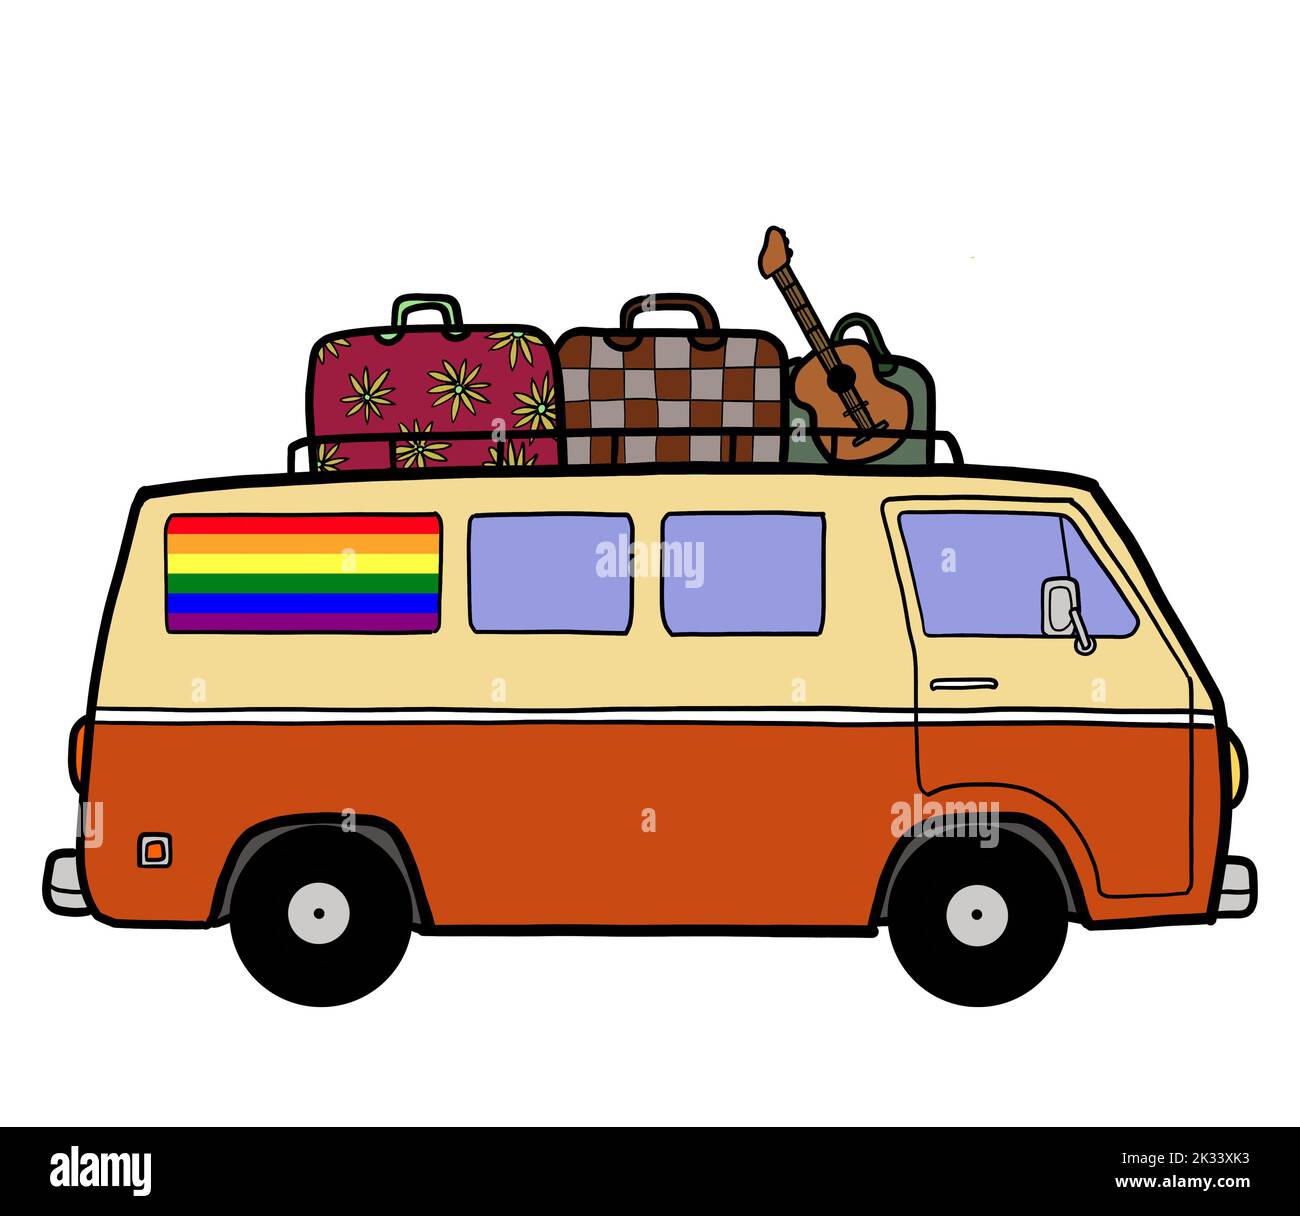 A camper van with travel suitcase luggage and the guitar on the top with a gay pride rainbow lgbtq flag. Van life road trip in summer vacation concept Stock Photo